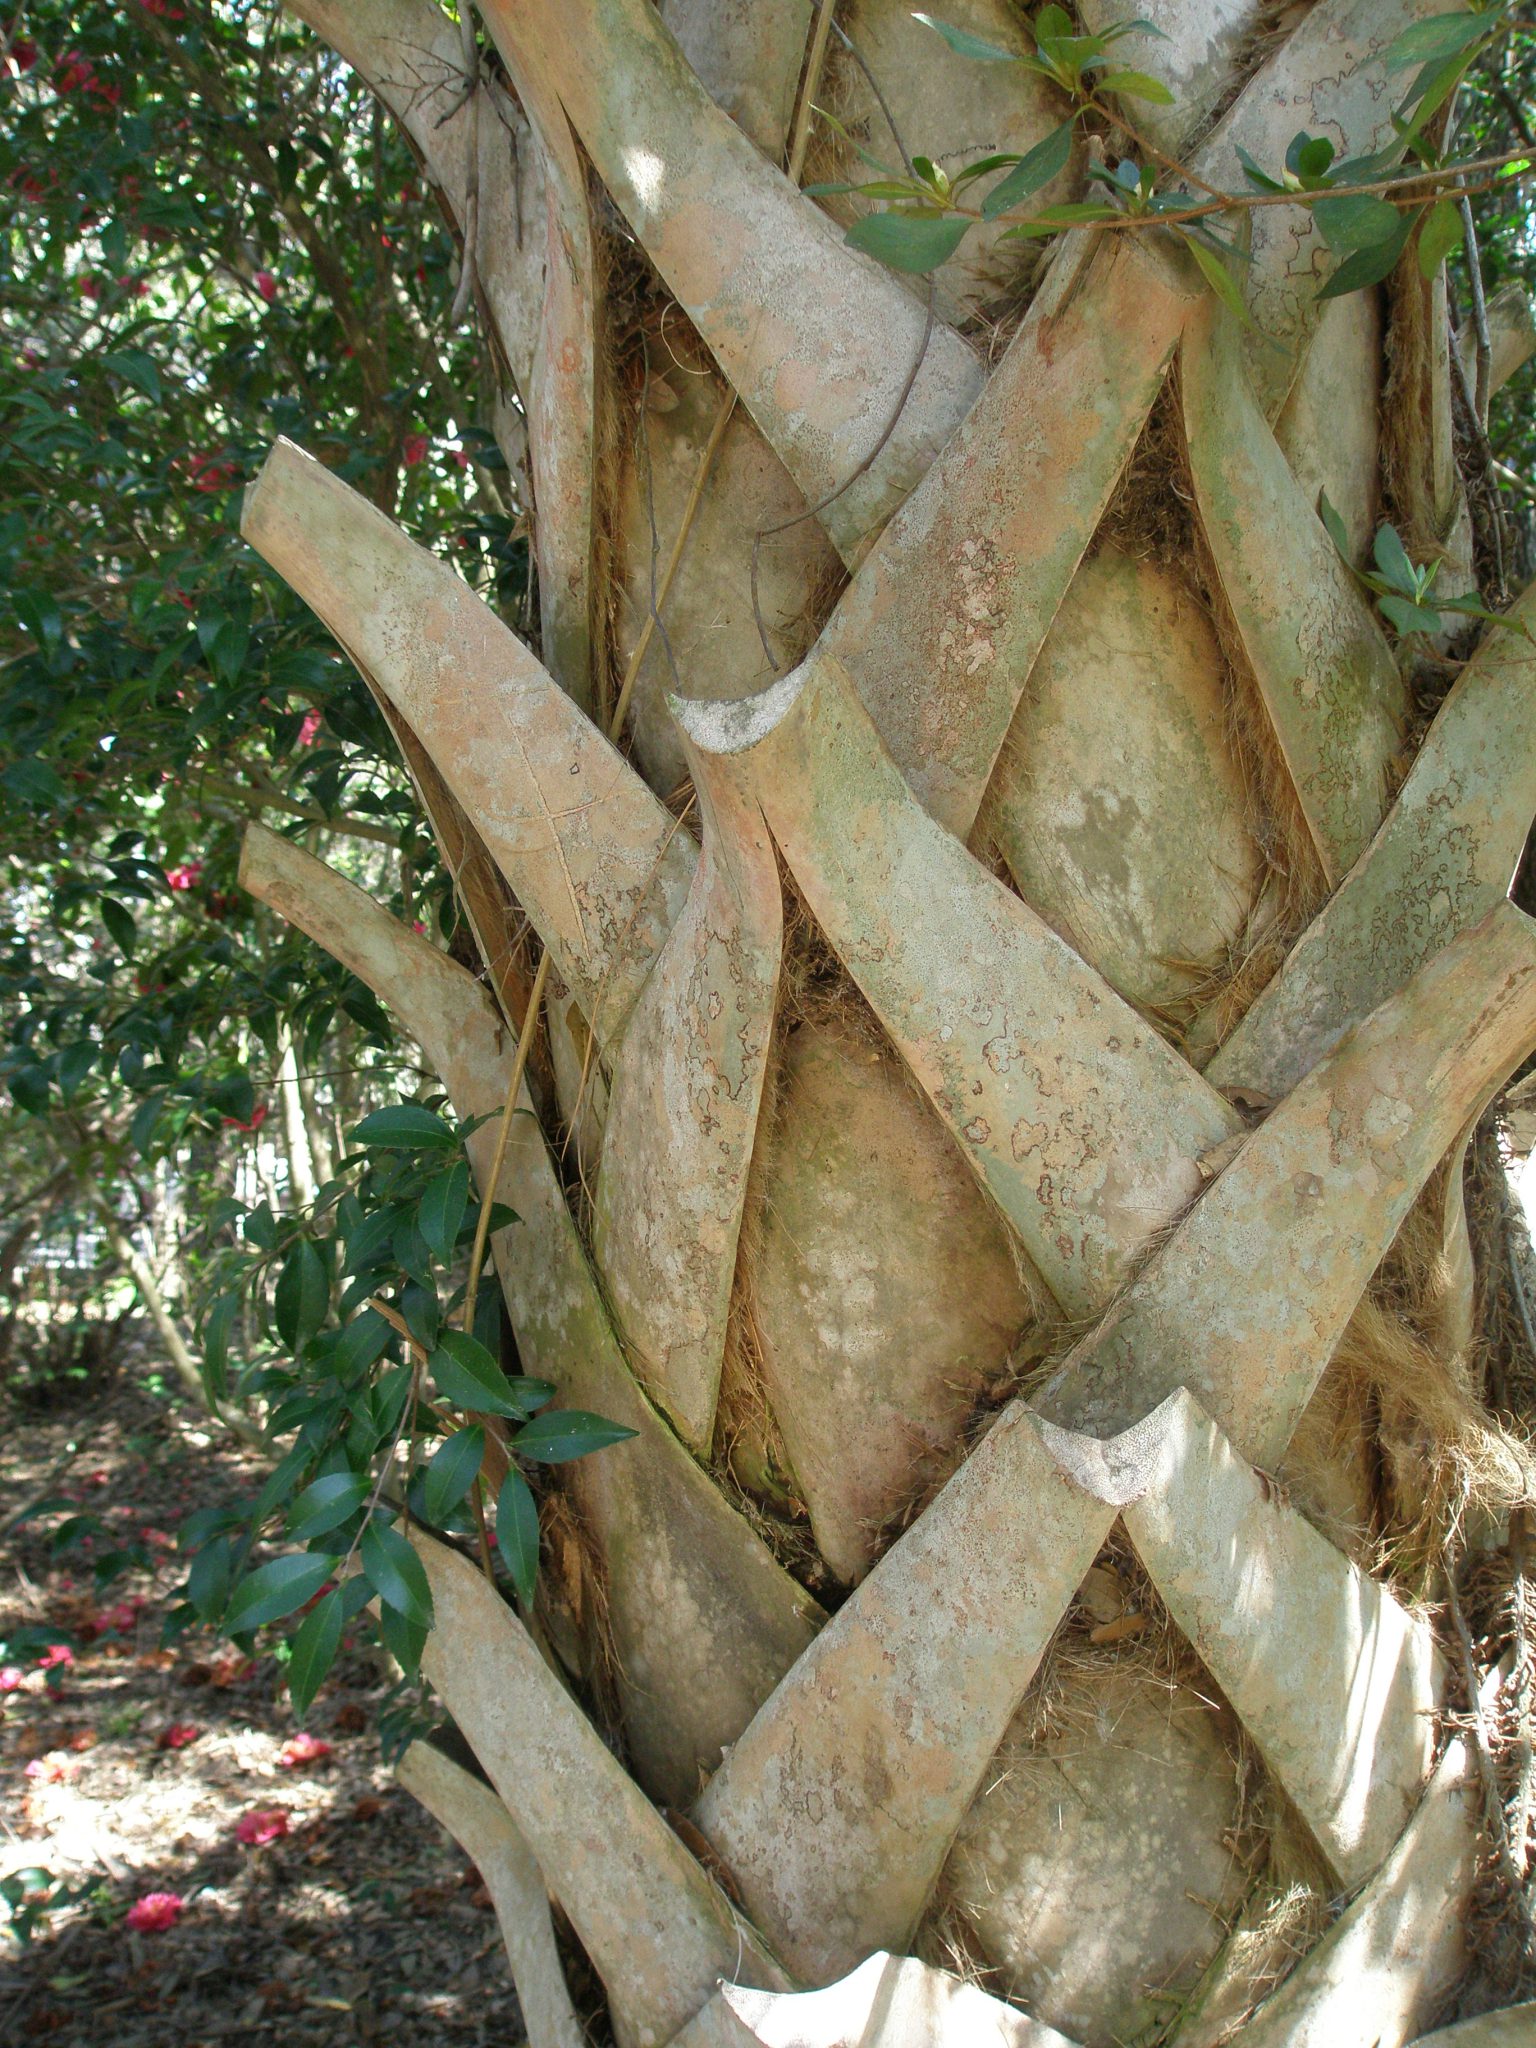 Trunk of a Palmetto Tree (read my HISTORIC CHARLESTON article to learn more about the Mighty Palmetto).